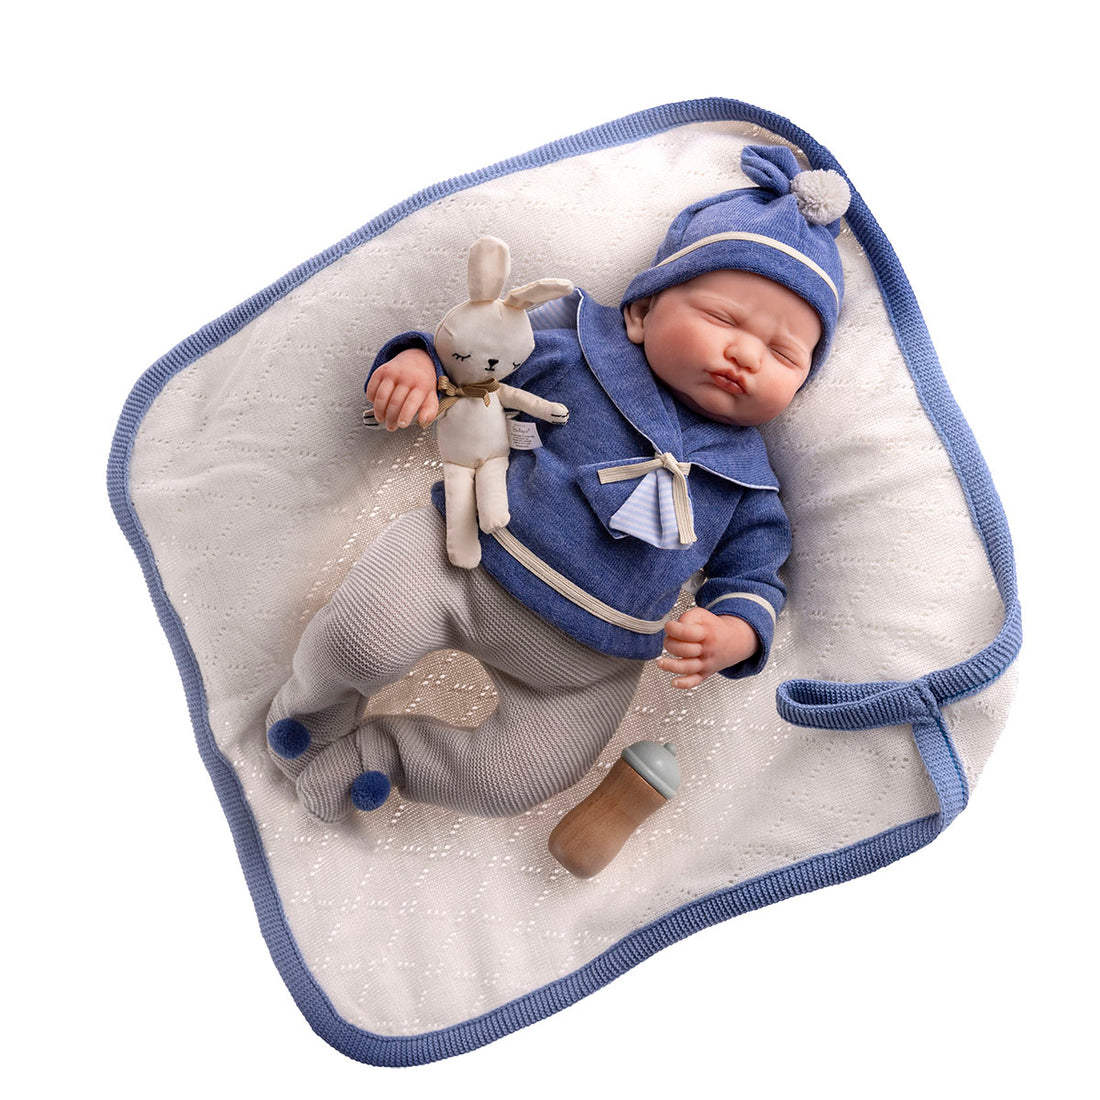 Reborn Doll | Weighted Hand Painted Soft Vinyl | Limited Edition | Mateo | Sailor Blue